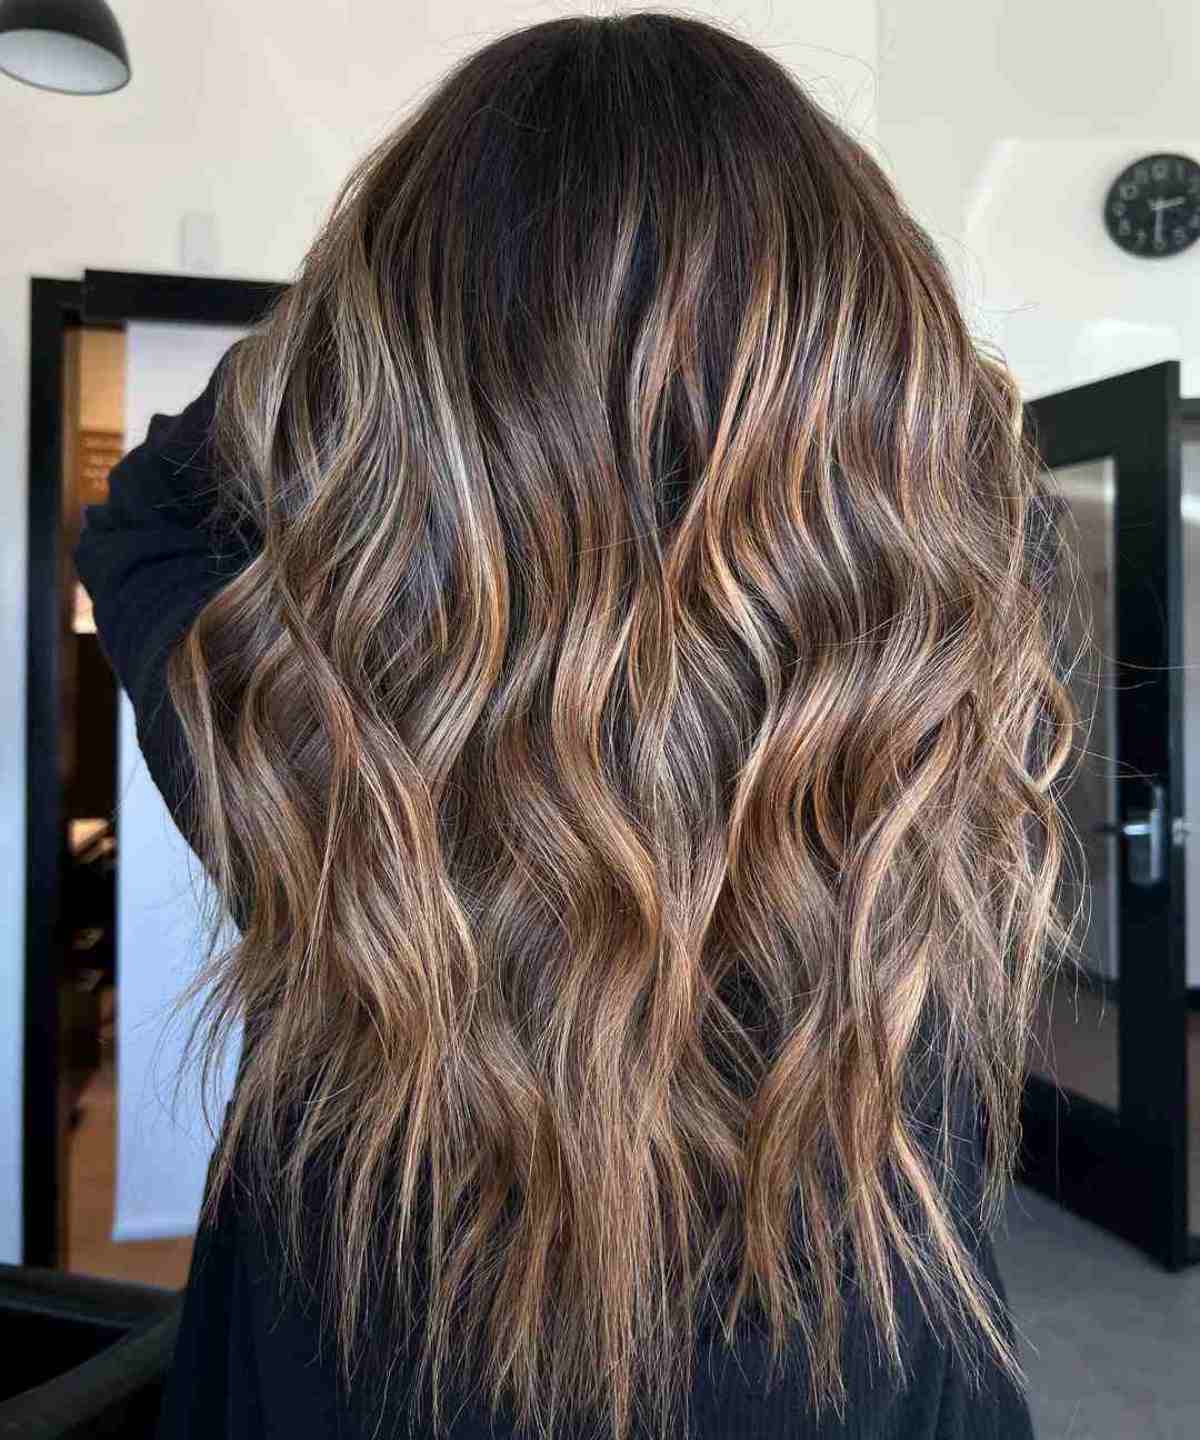 Long Bronde Balayage Beachy Waves with Textured Ends